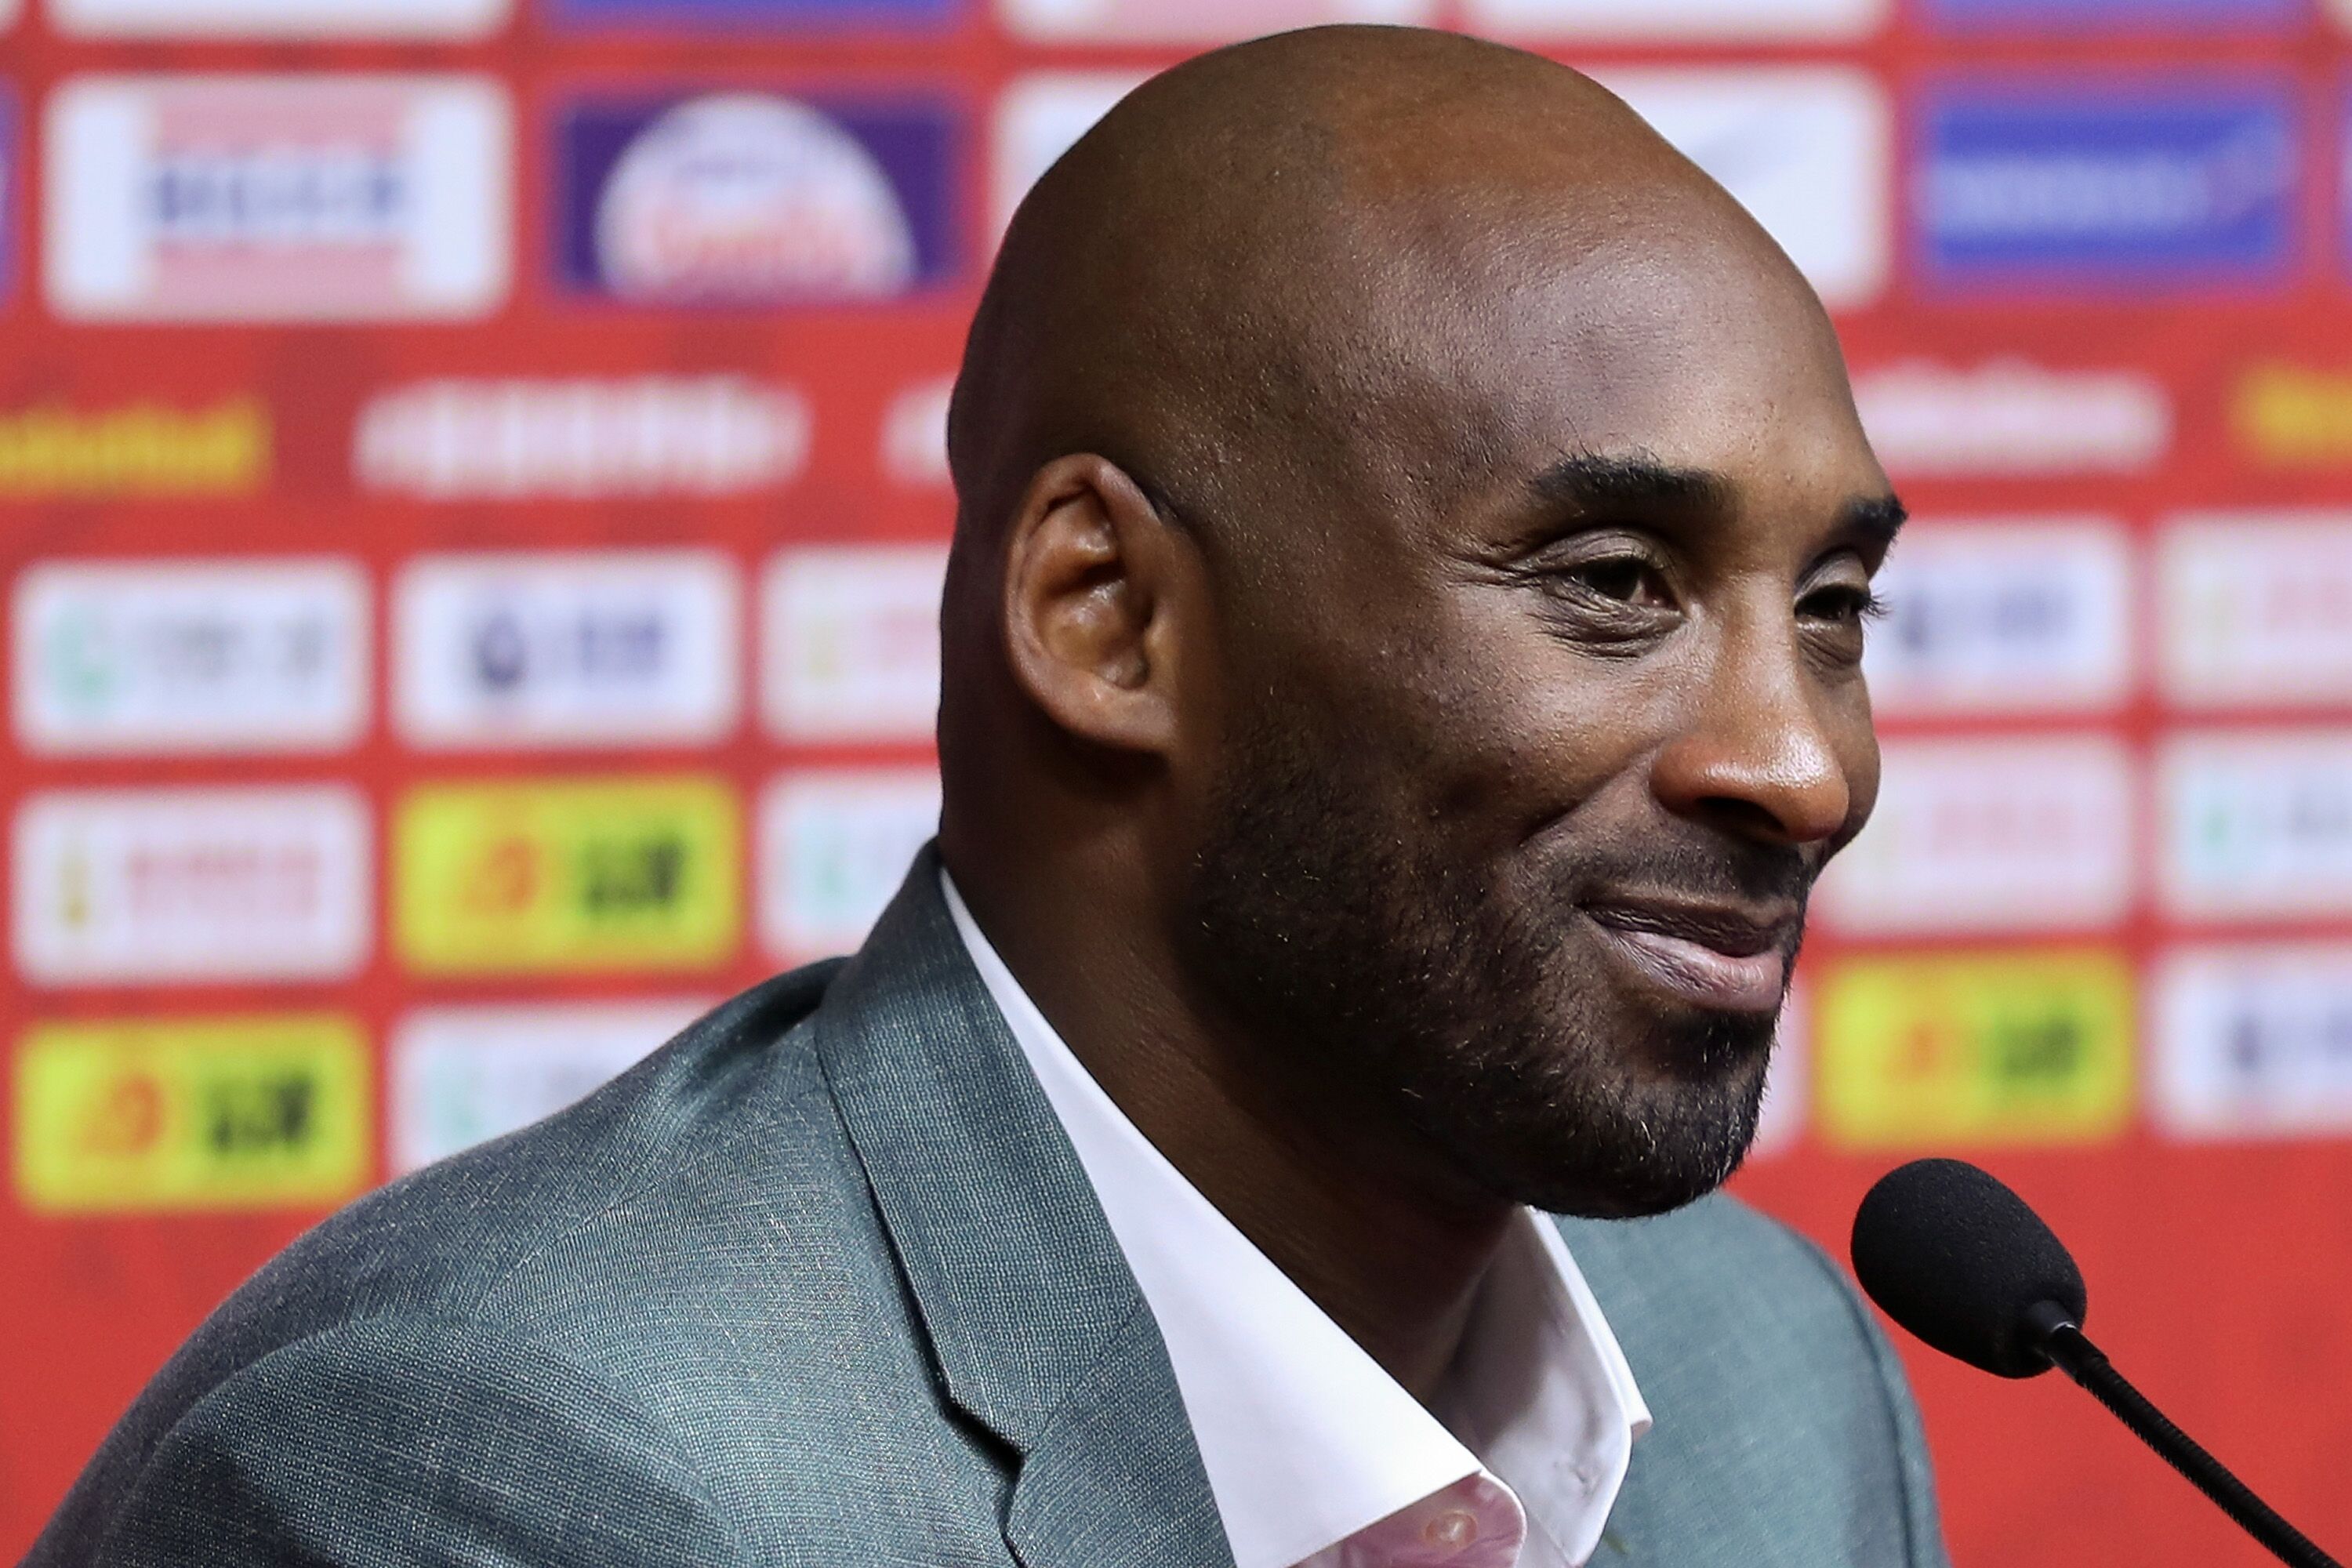 Kobe Bryant at a speaking engagement | Source: Getty Images/GlobalImagesUkraine